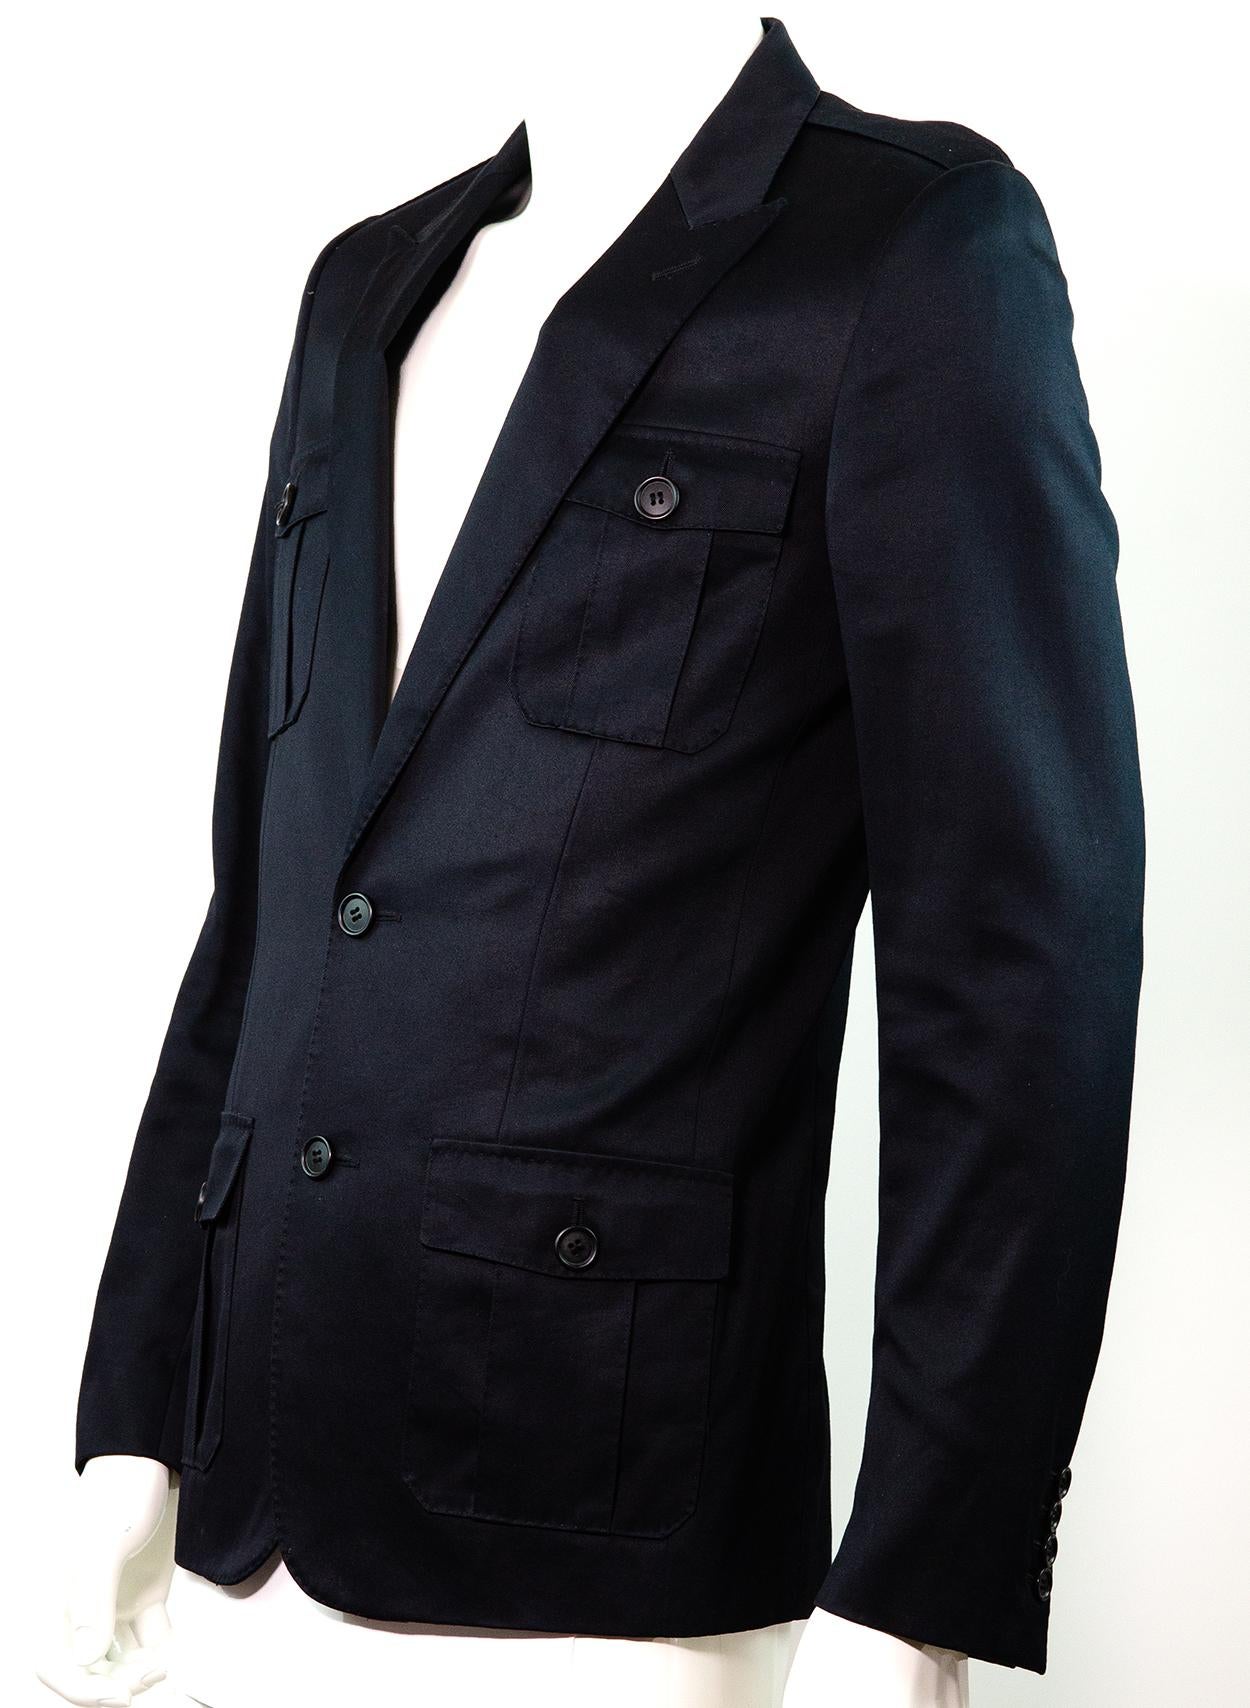 DIOR HOMME By HEDI SLIMANE 2006 Safari Blazer 46 In Excellent Condition For Sale In Berlin, BE